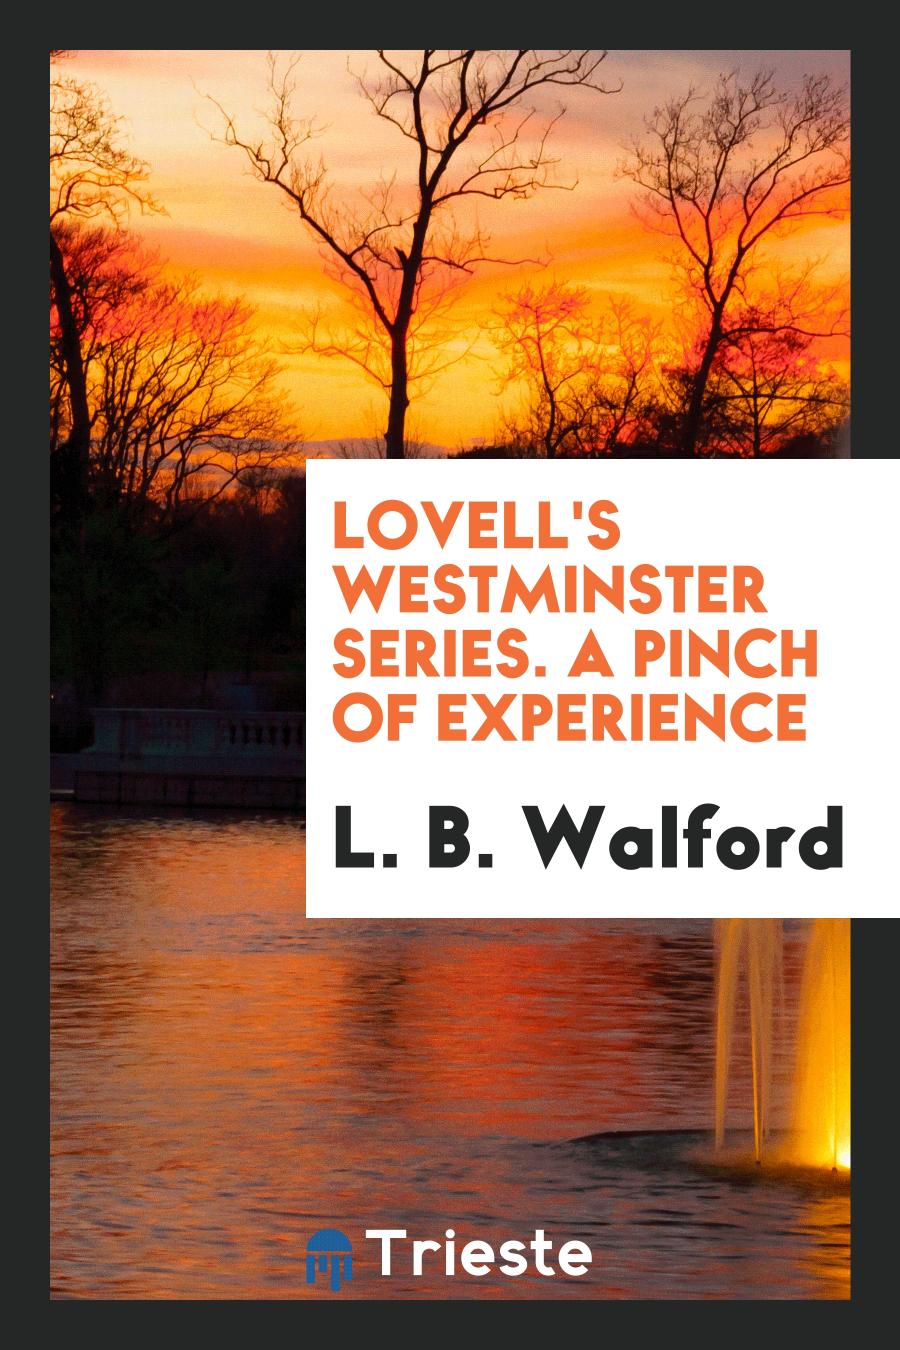 Lovell's Westminster Series. A Pinch of Experience